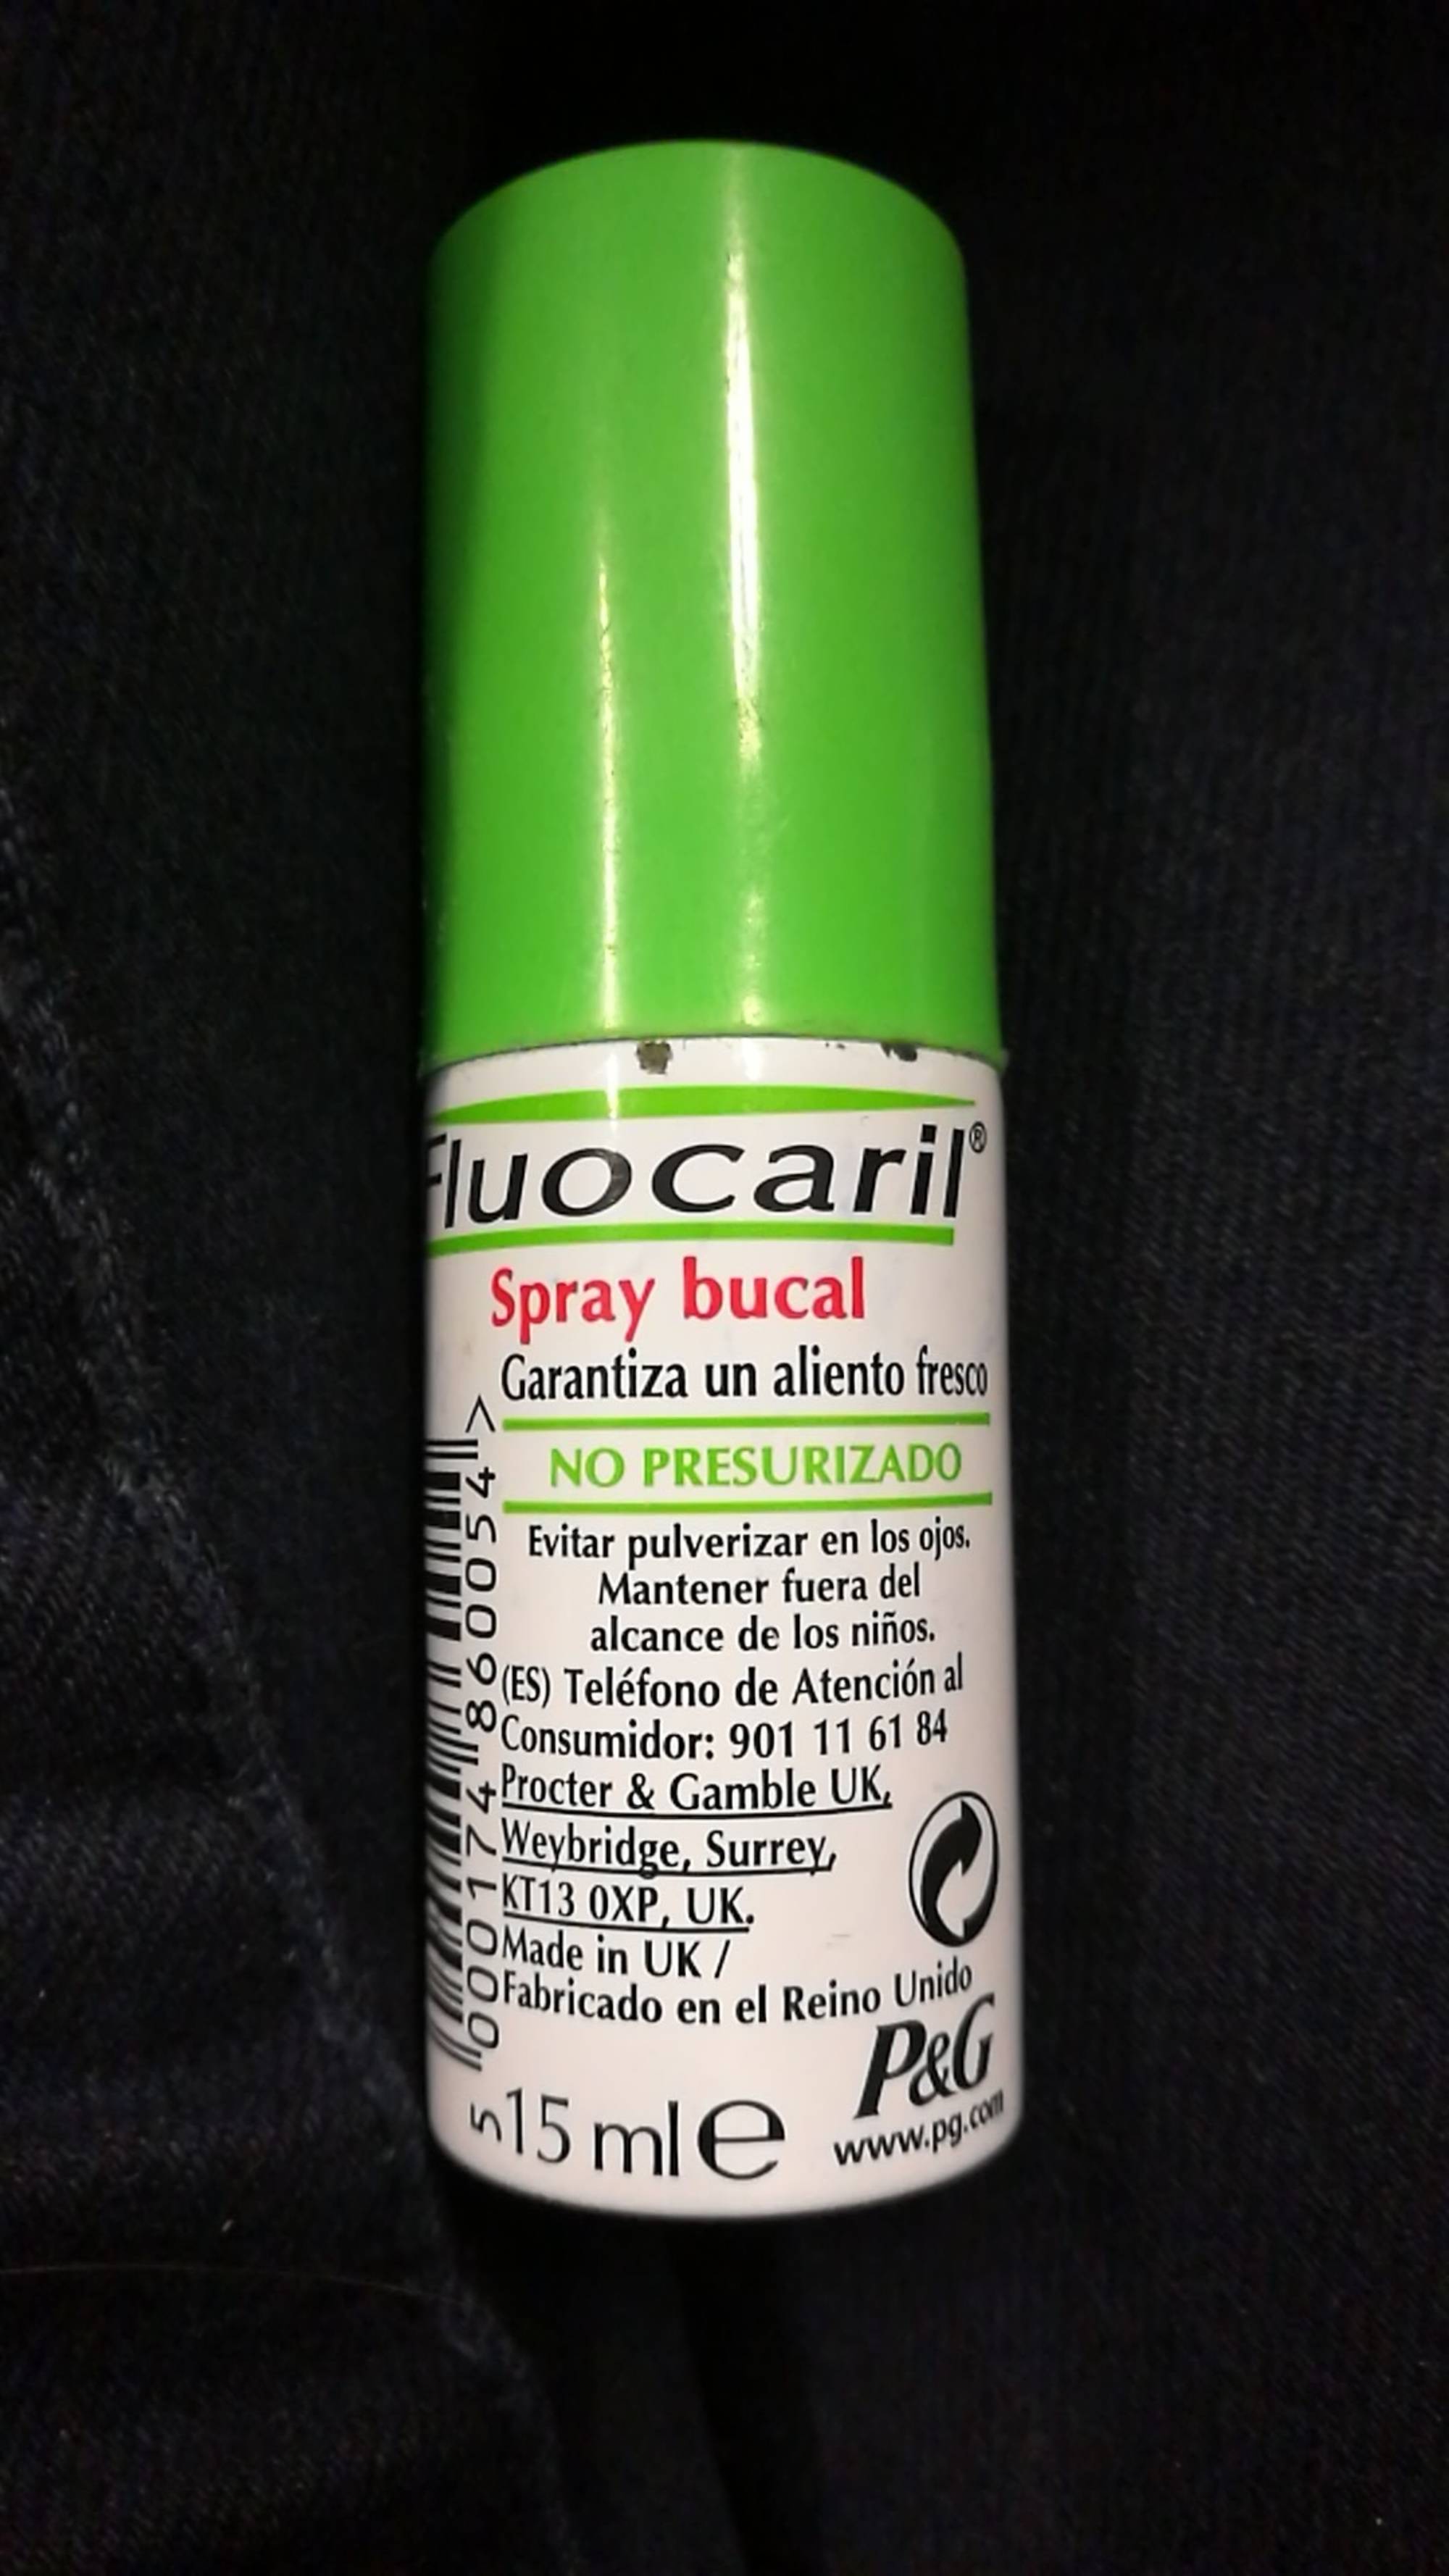 PACK SPRAY BUCCAL – Kit Blanchiment Dentaire BBRYANCE ©